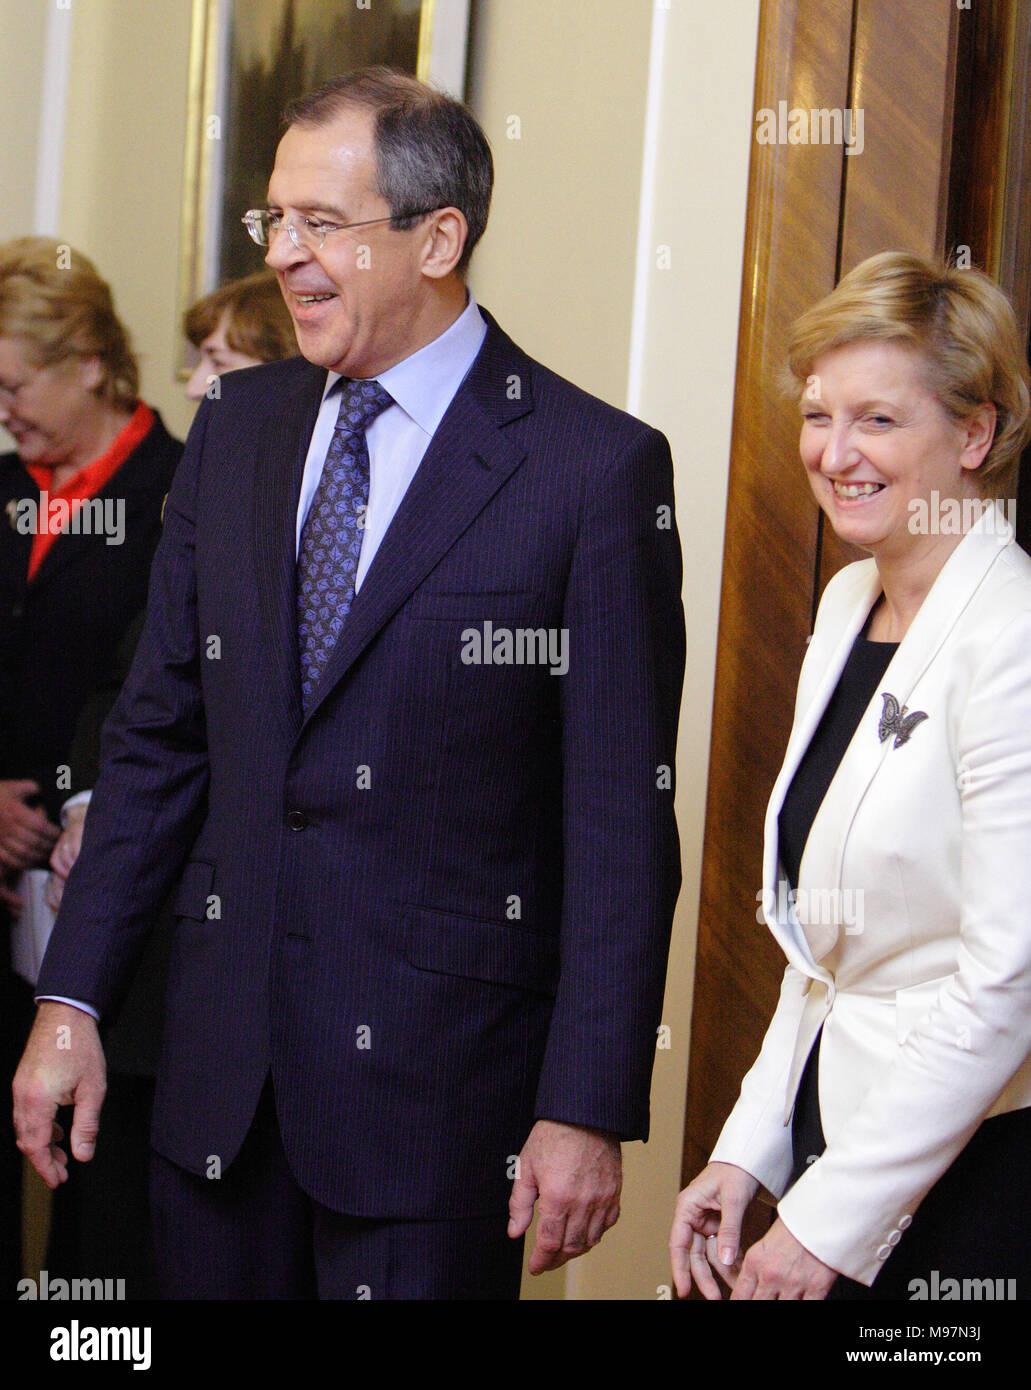 Warsaw, Masovia / Poland - 2006/10/05: Sergey Lavrov - Foreign Affairs Minister of Russian Federation with Anna Fotyga - Foreign Affairs Minister of P Stock Photo